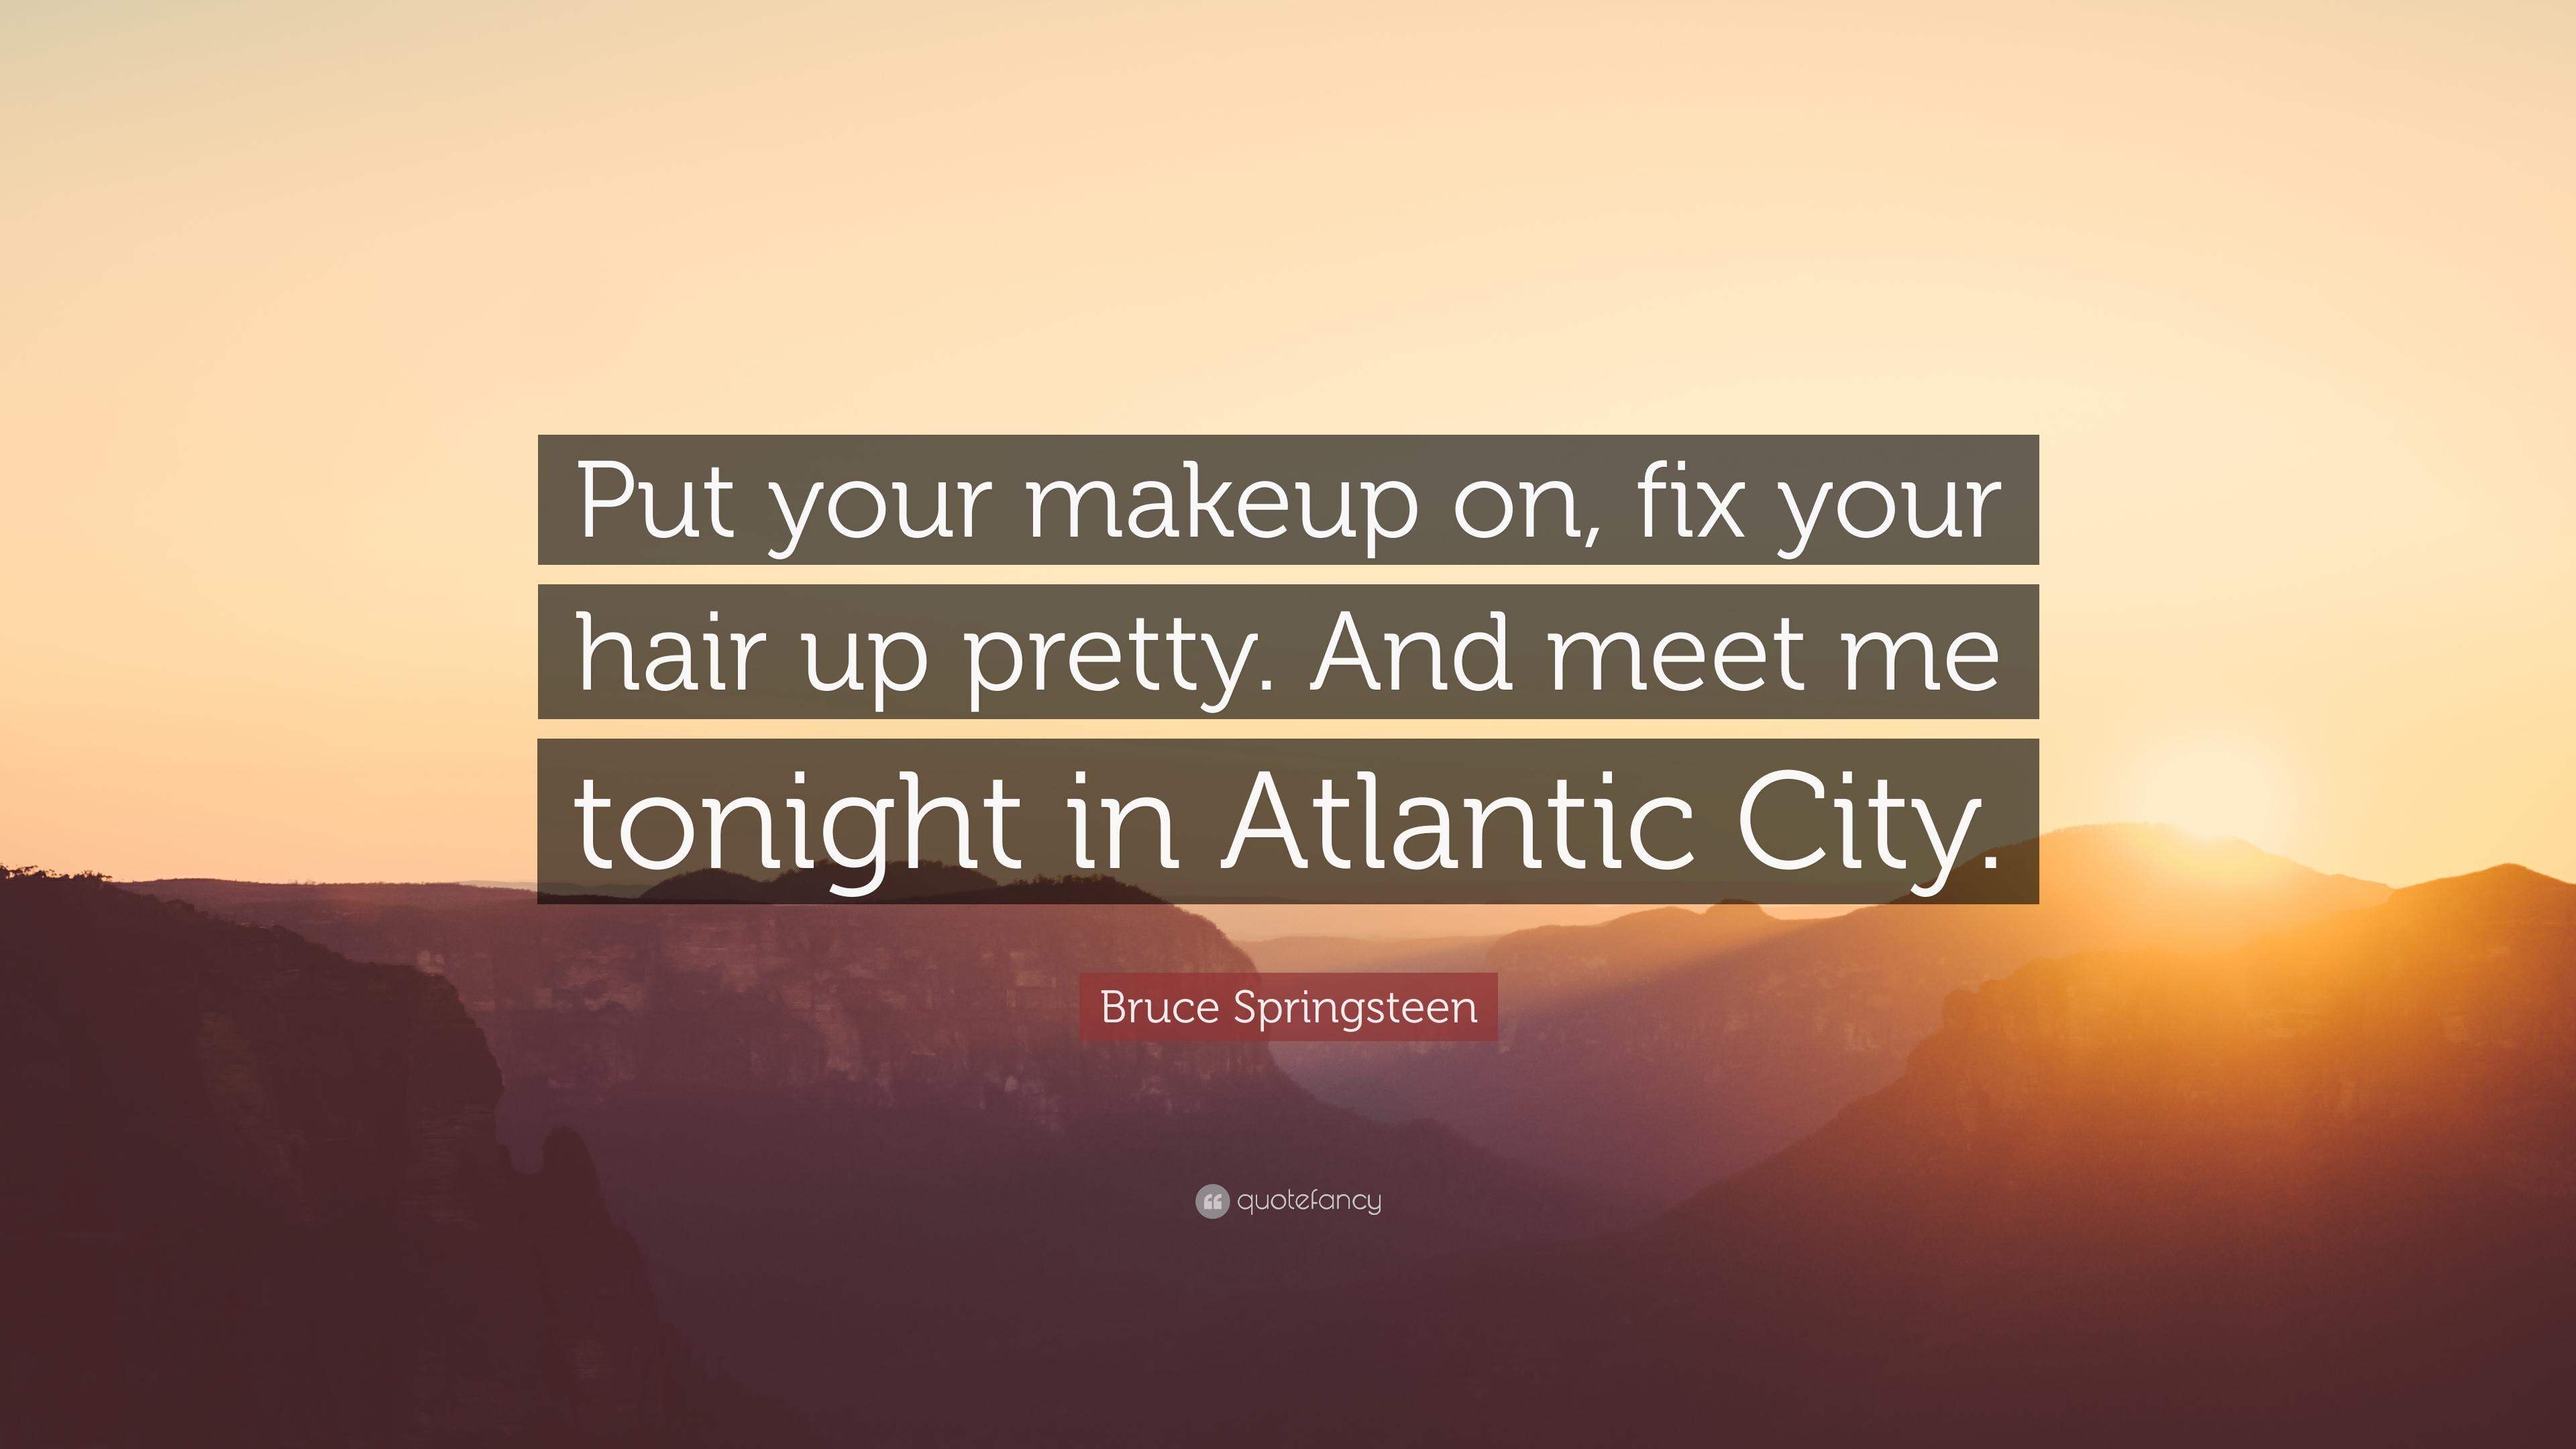 Bruce Springsteen Quote: “Put your makeup on, fix your hair up